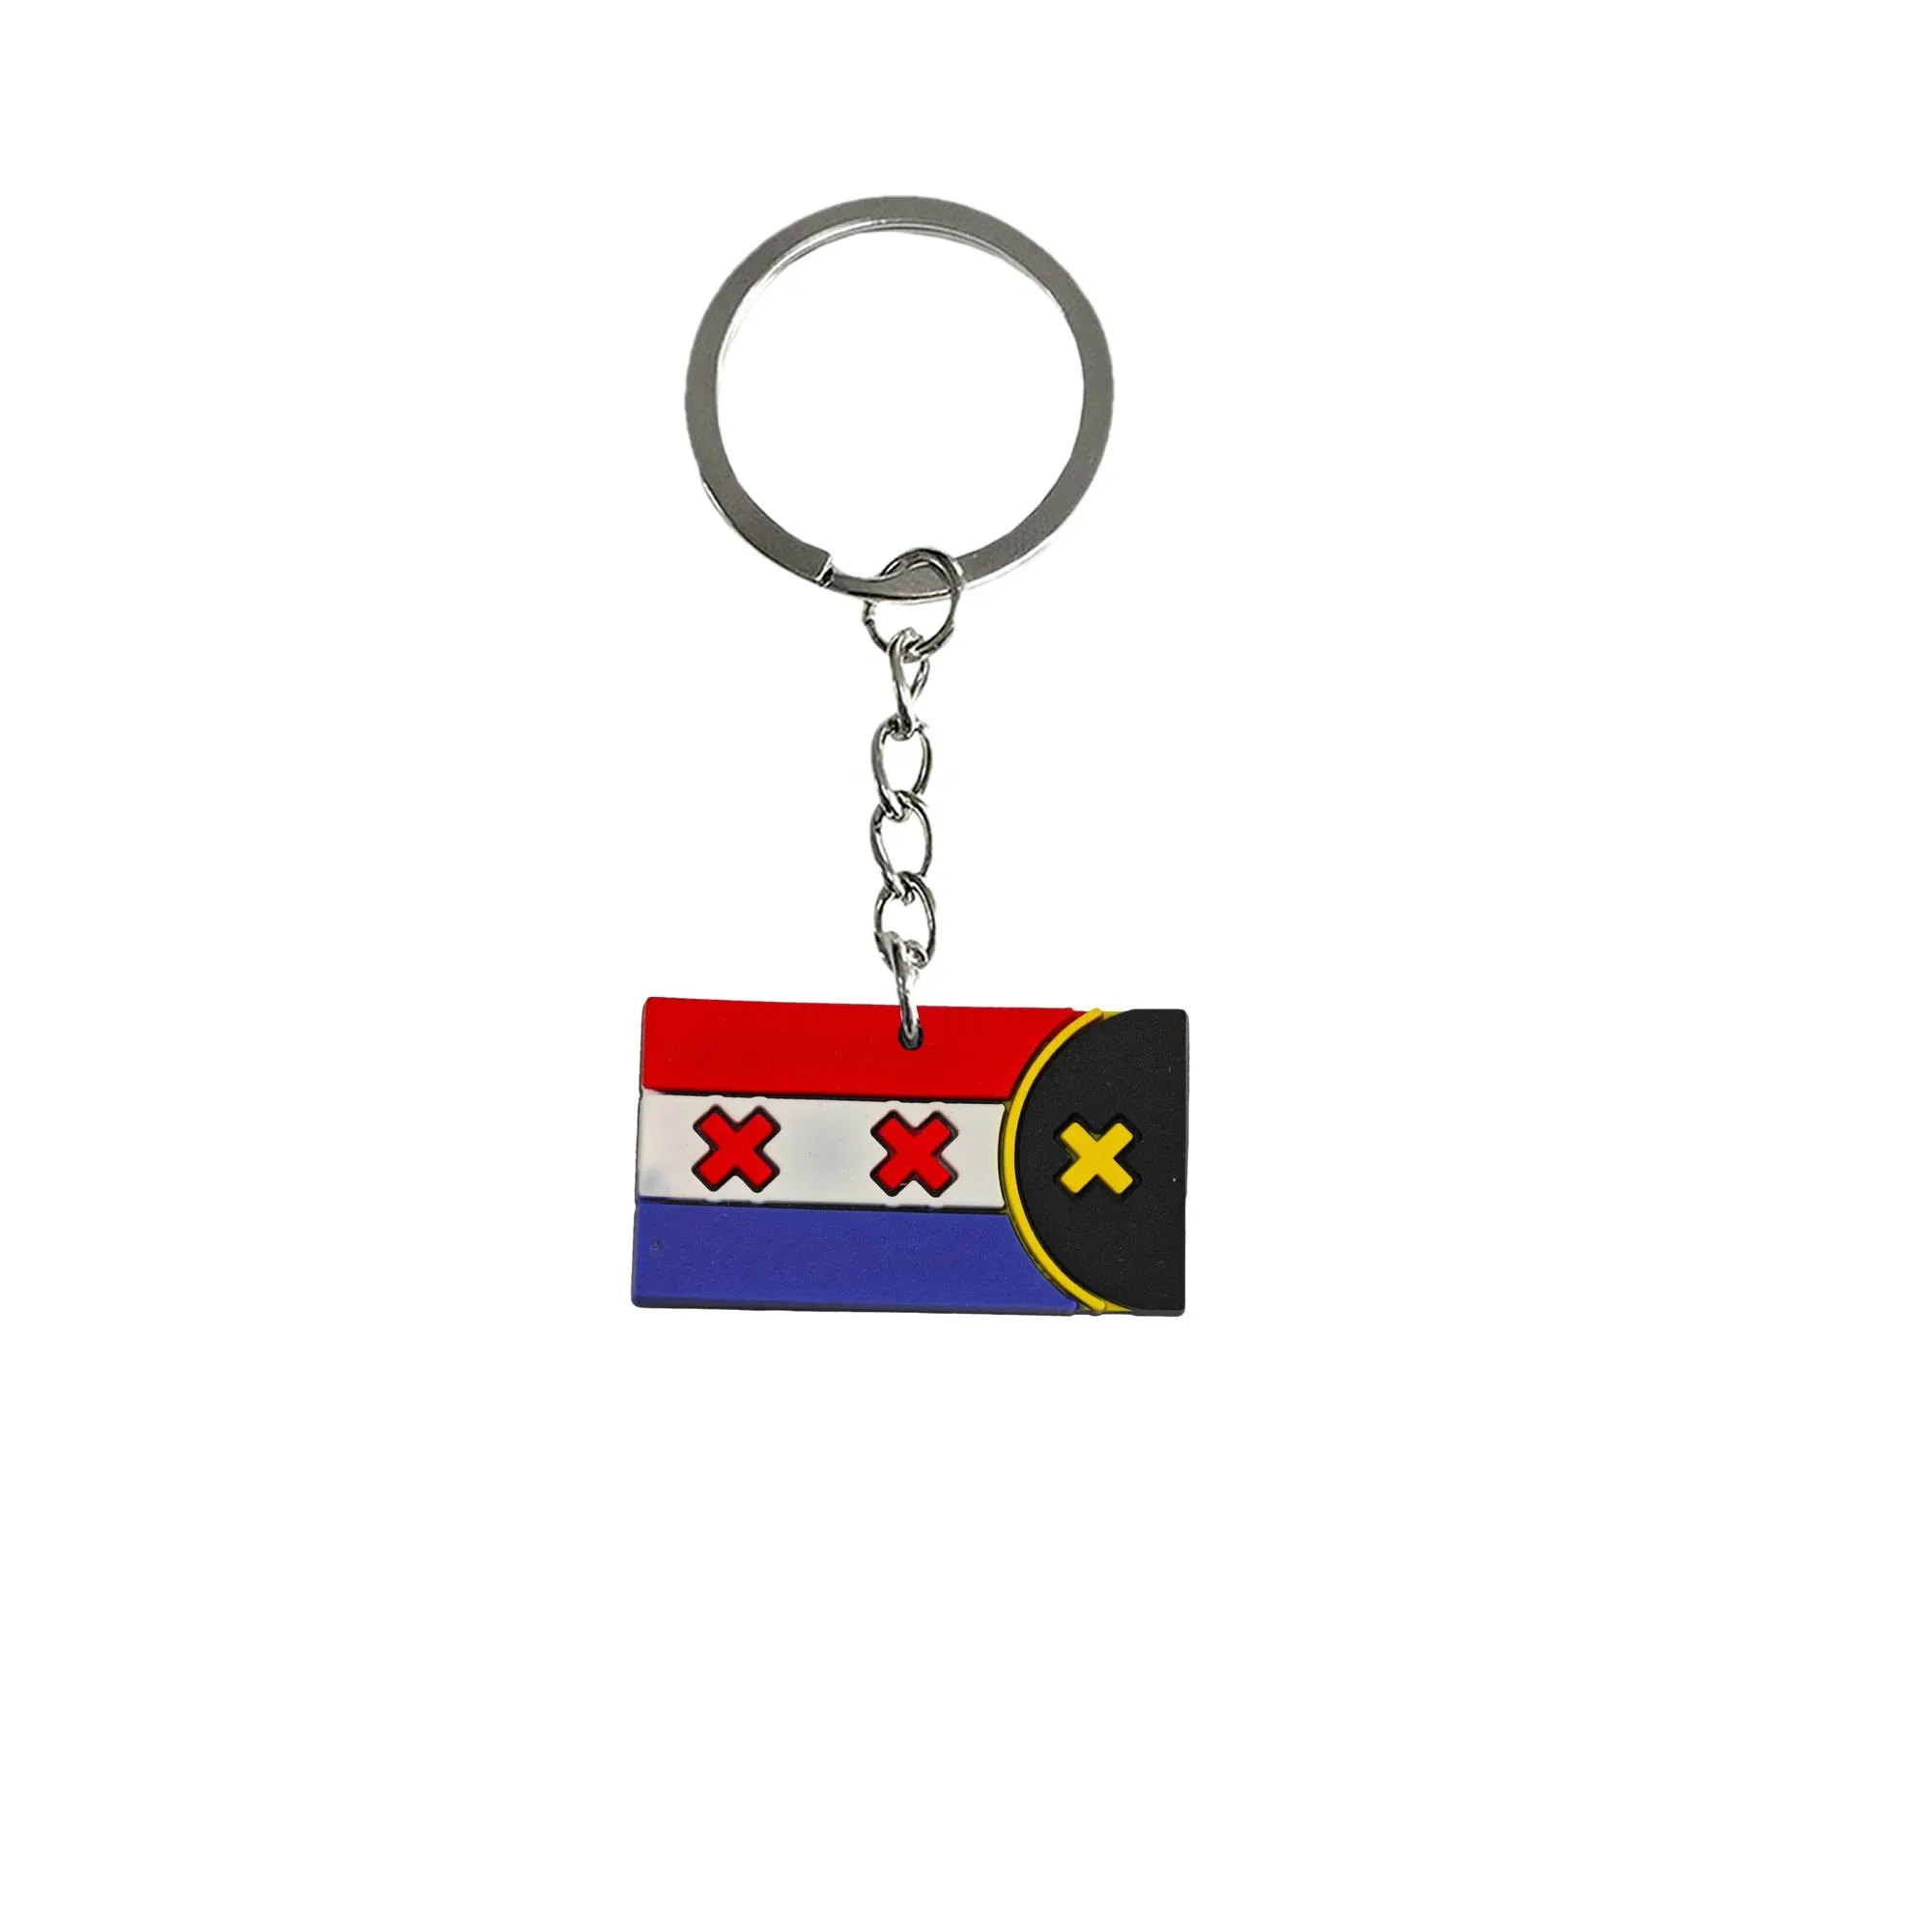 national flag keychain for tags goodie bag stuffer christmas gifts key chain ring gift fans rings keyring suitable schoolbag keychains backpack car girls